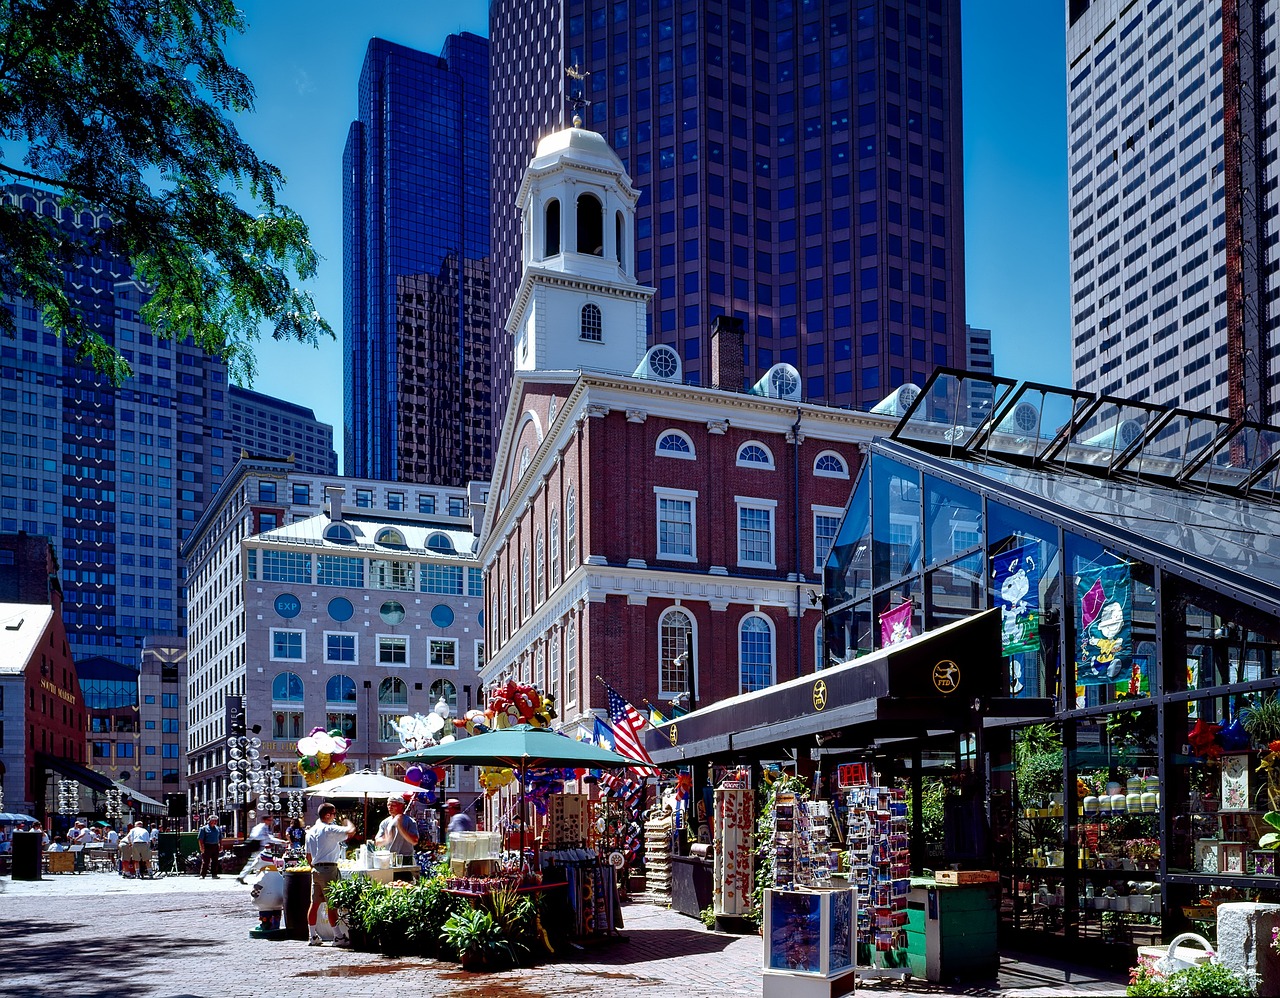 Boston: A Historical, Culinary, and Educational Adventure